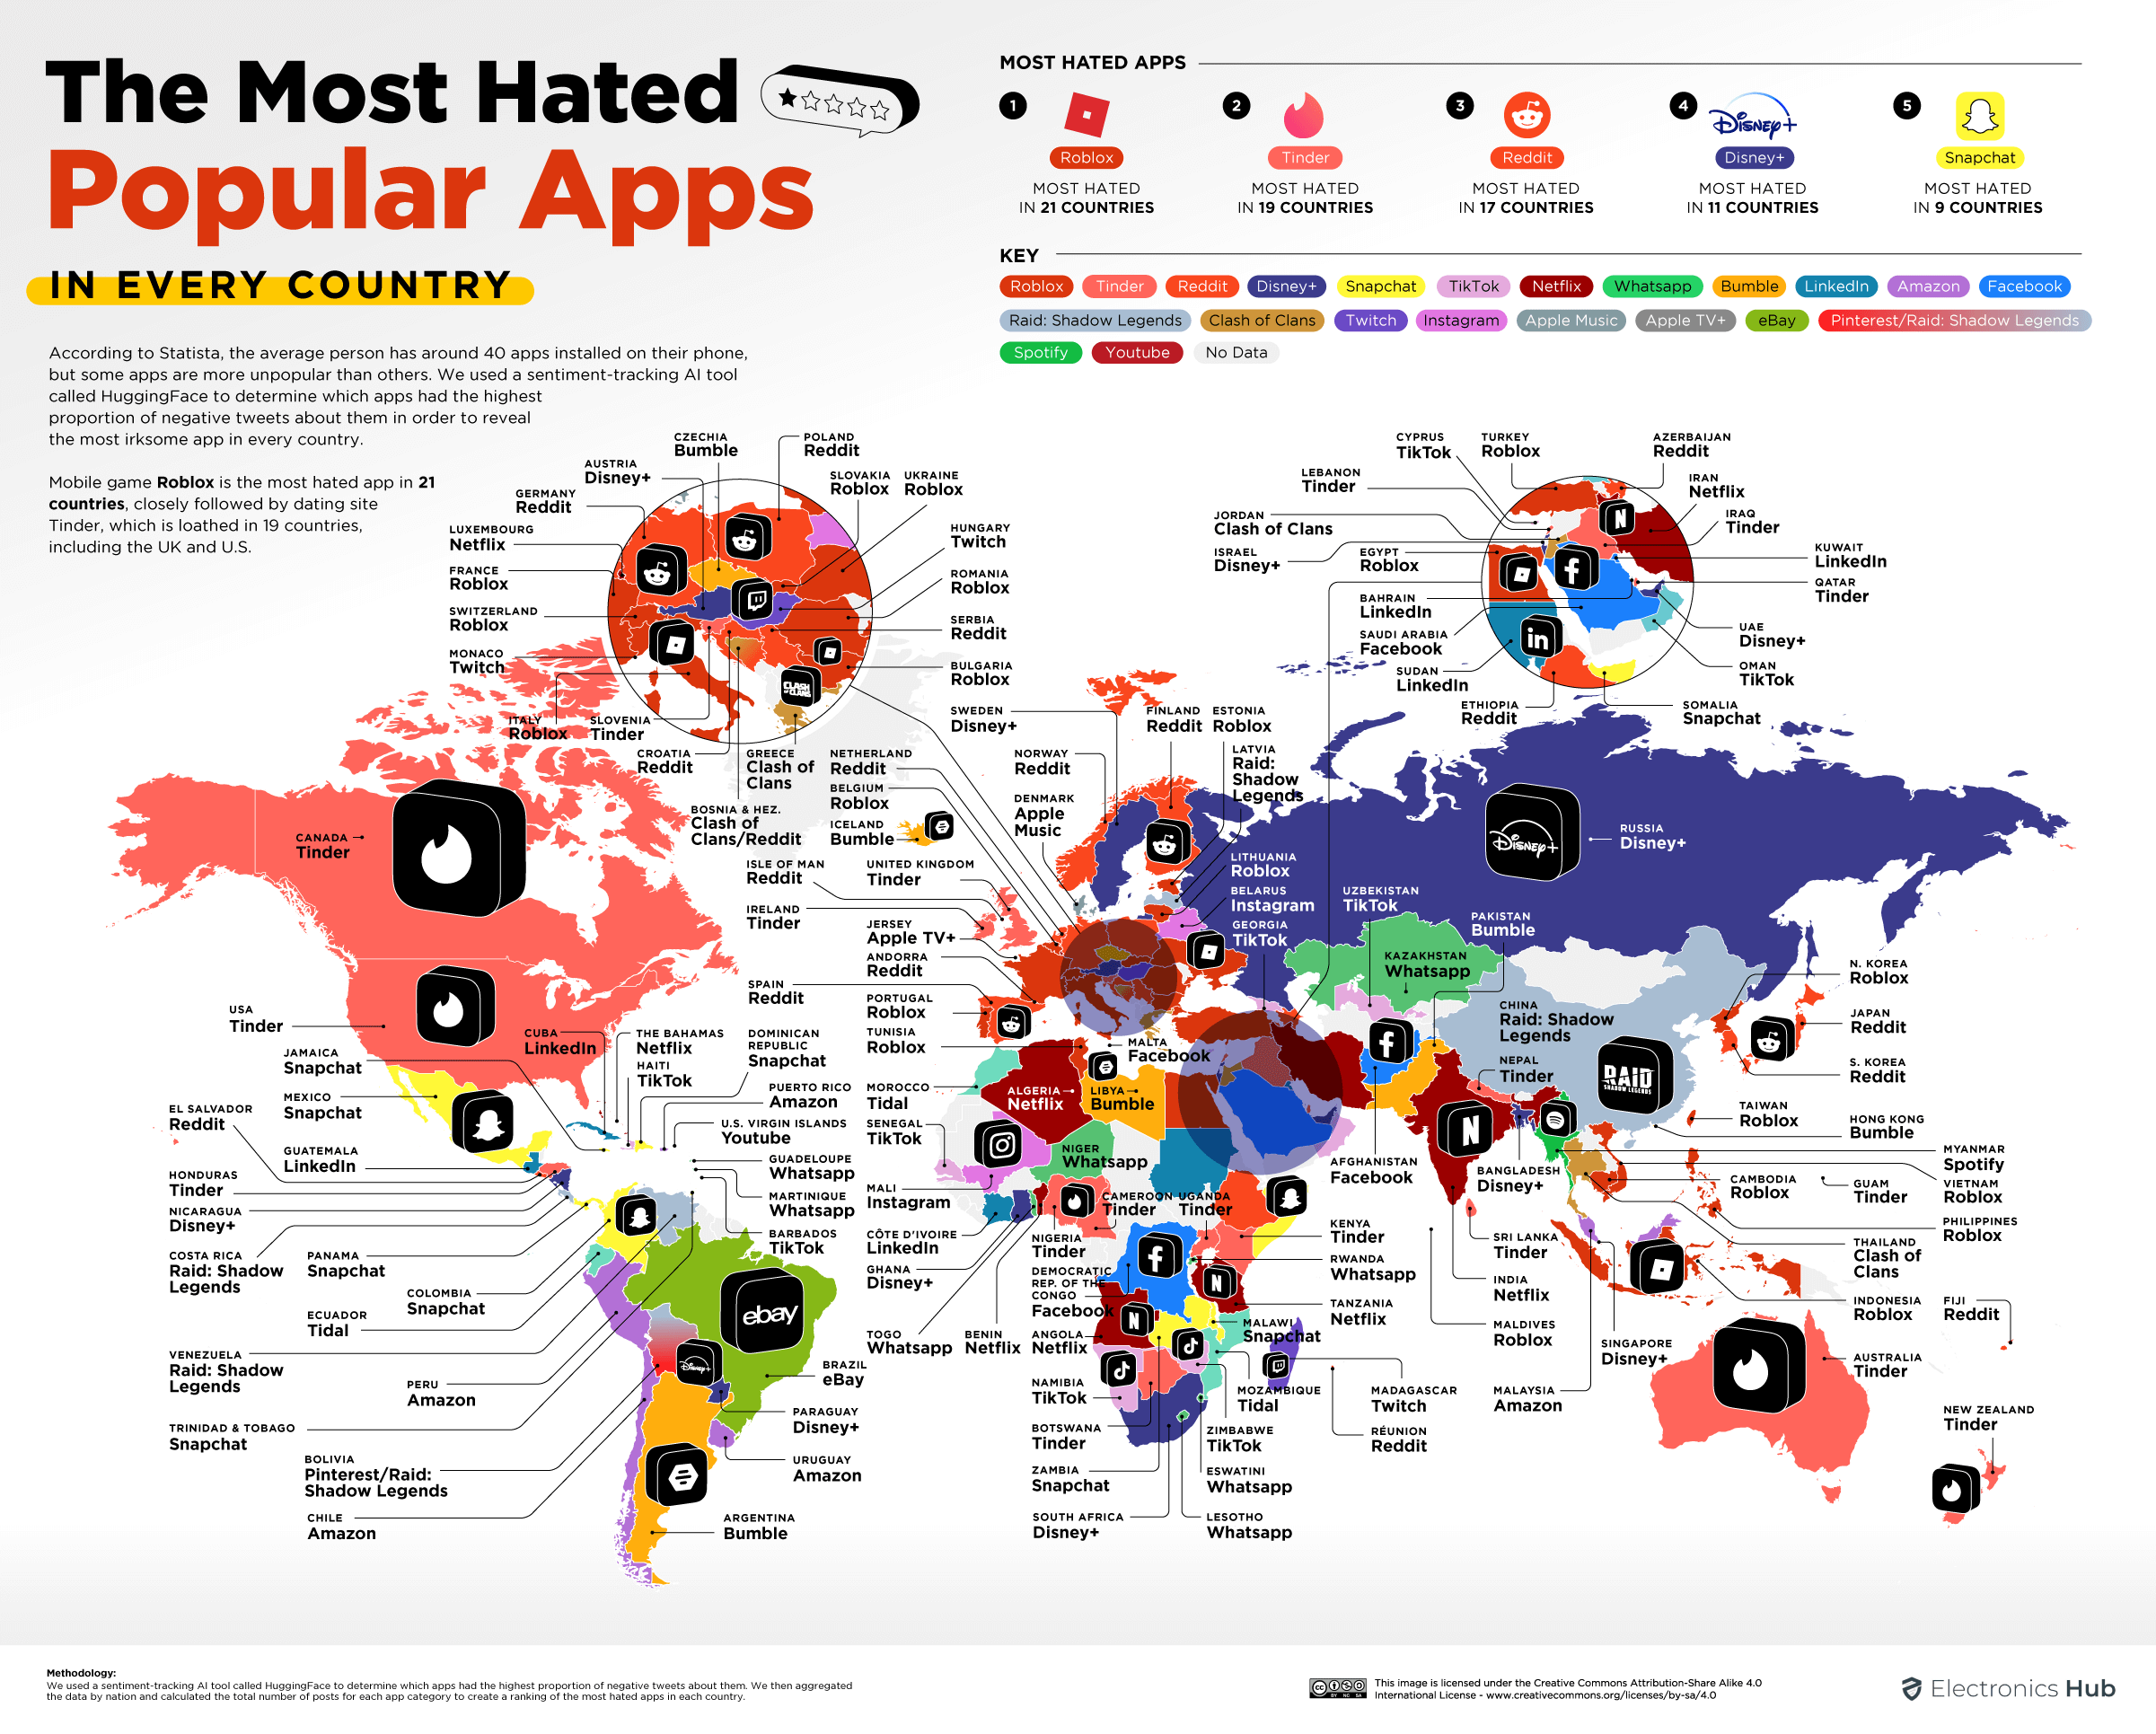 Infographic of the most hated apps in the world by country.